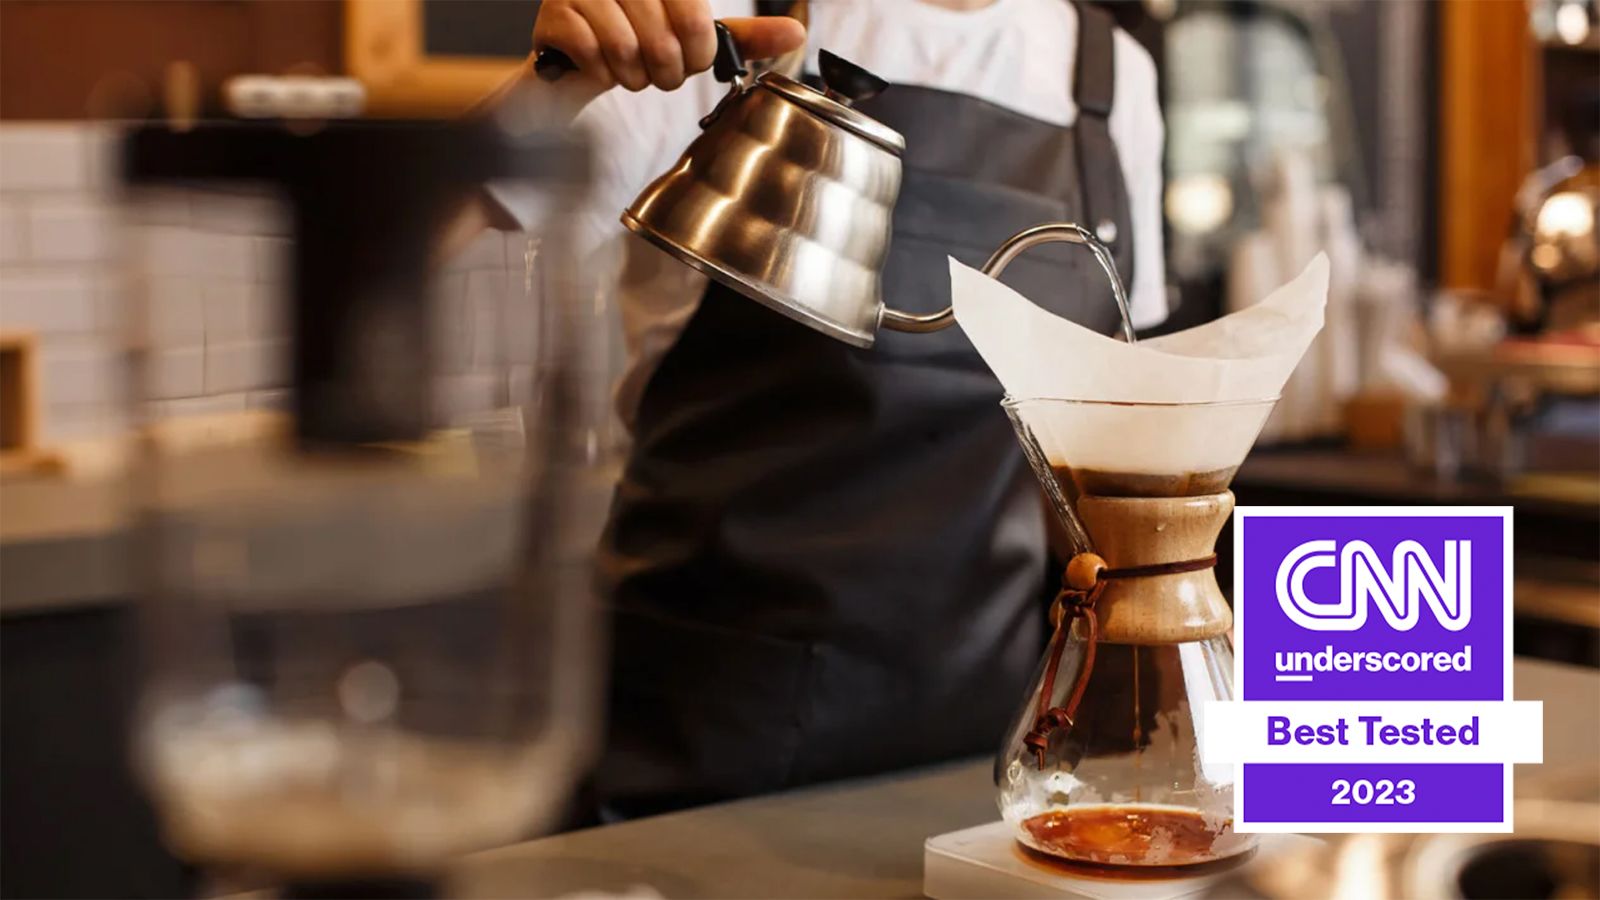 The 10 Best Pour Over Coffee Makers of 2023, Tested & Reviewed